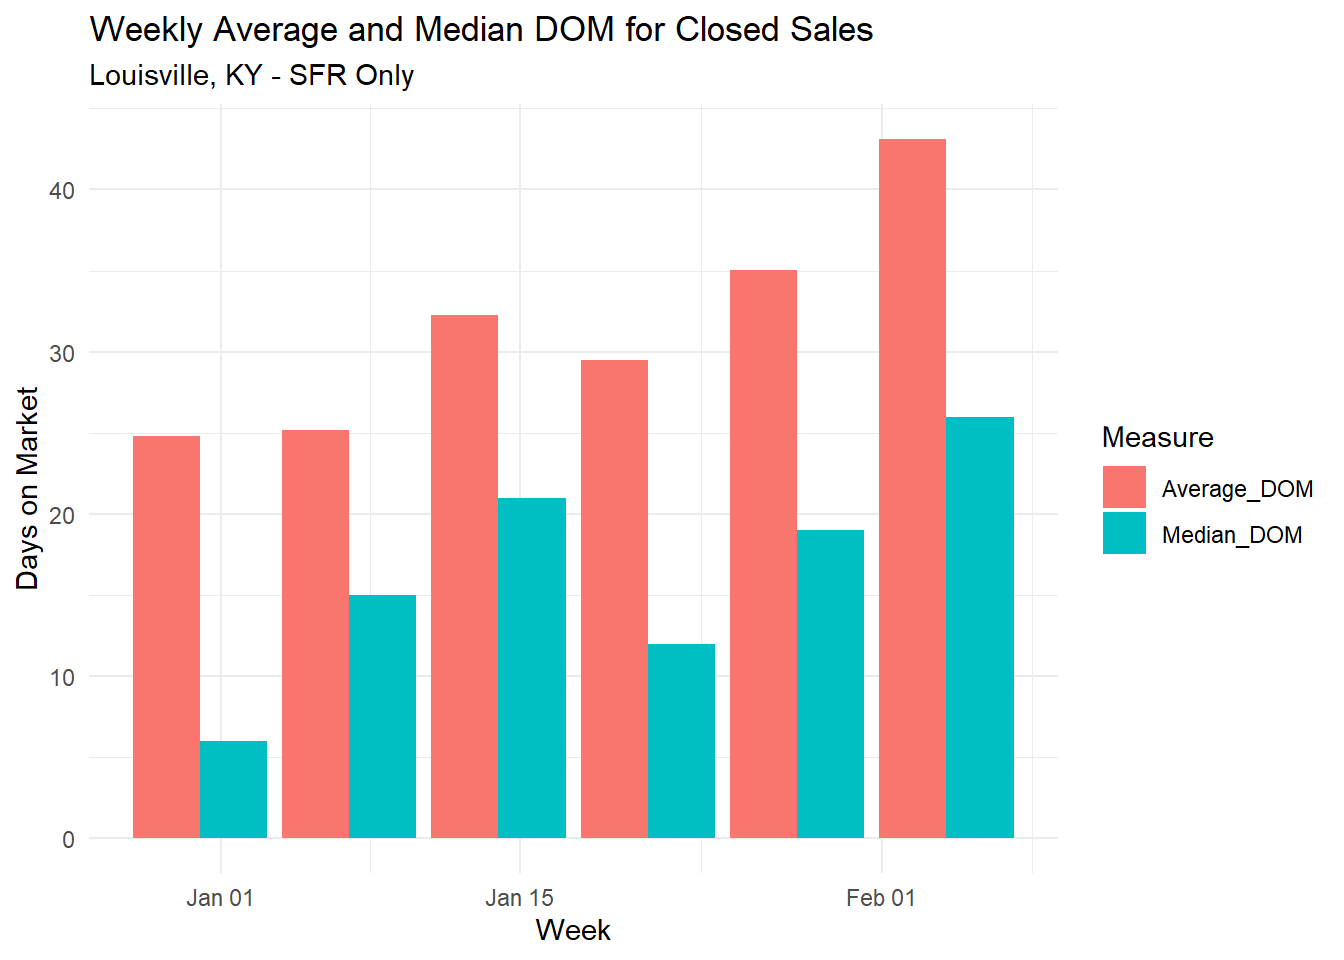 Bar graph showing the weekly average and median Days on Market (DOM) for closed single-family residence sales in Louisville, KY, with fluctuating times across different weeks.